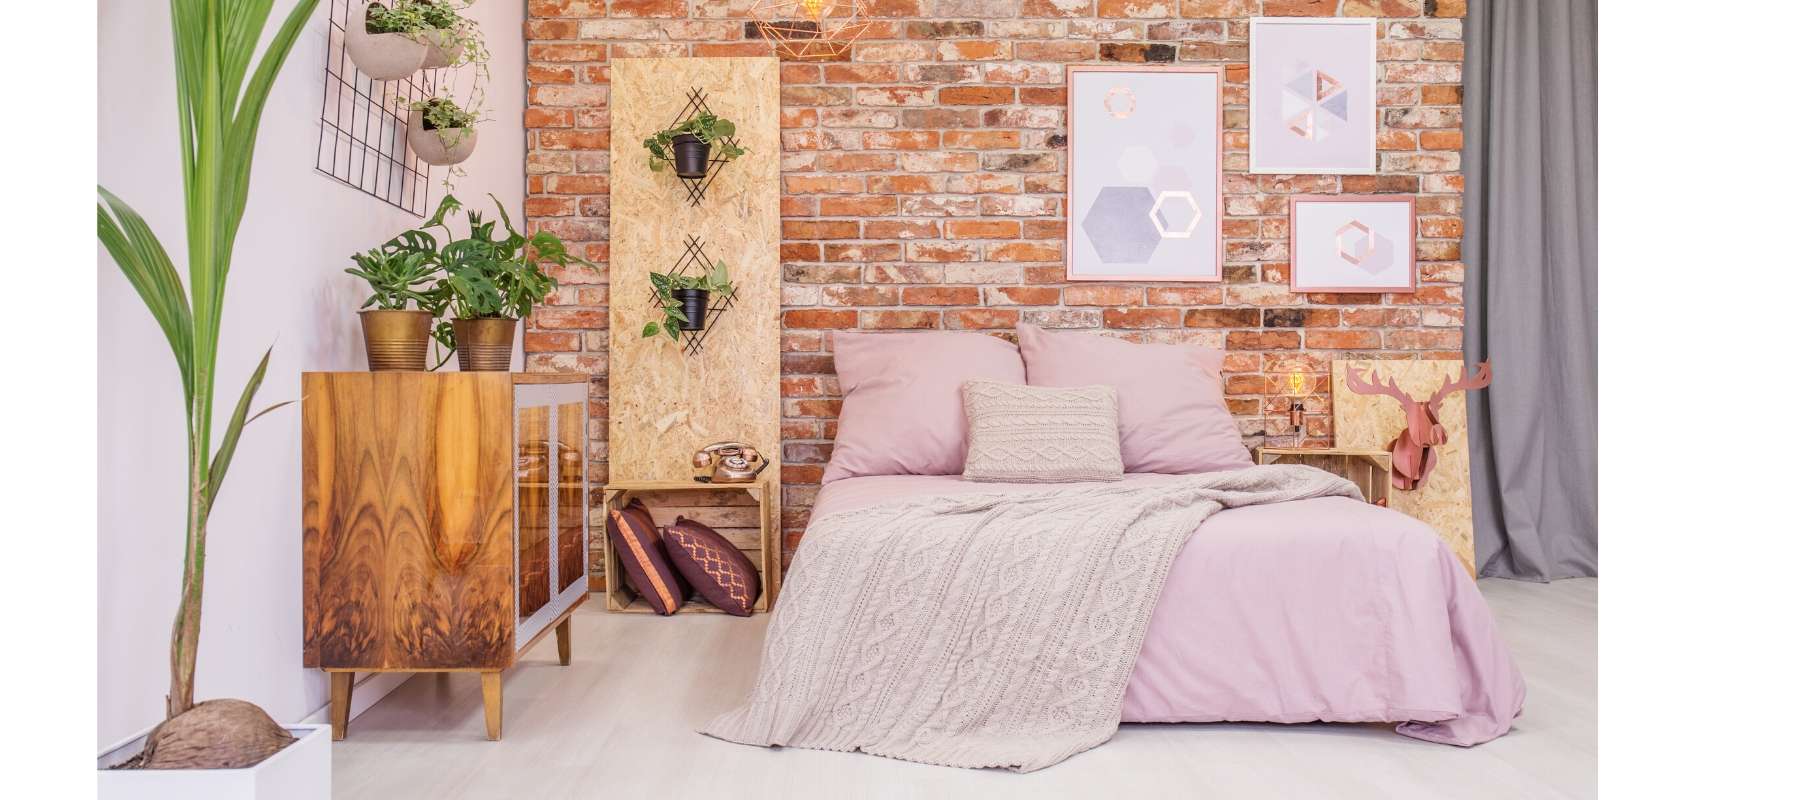 Double bed with blush pink covers against an exposed brick wall